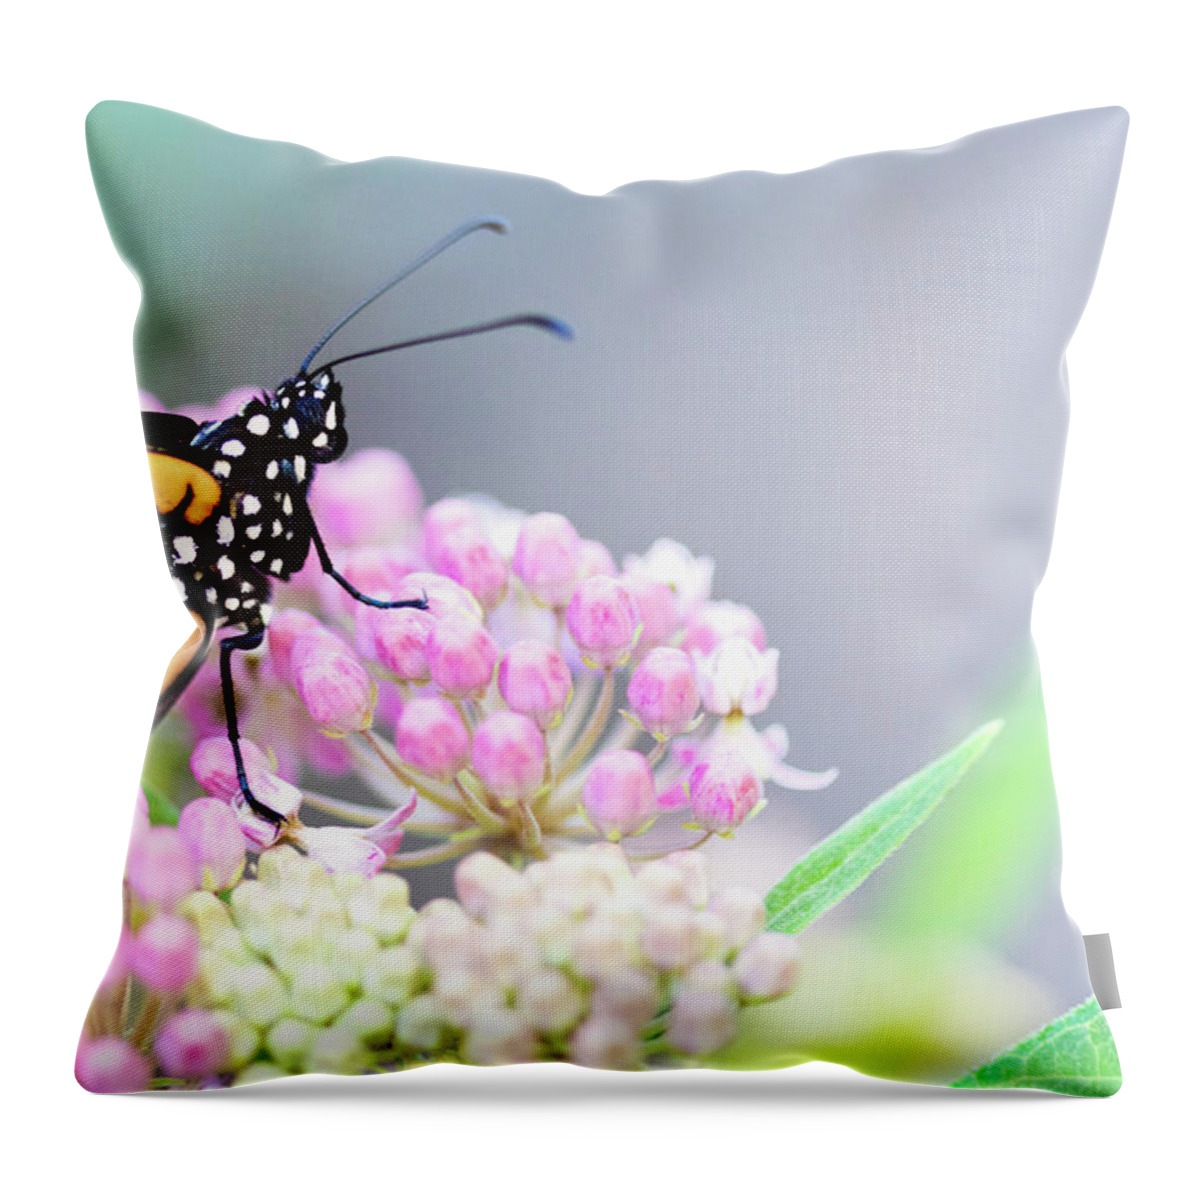 Monarch On Milkweed Throw Pillow featuring the photograph Monarch on Milkweed by Patty Colabuono